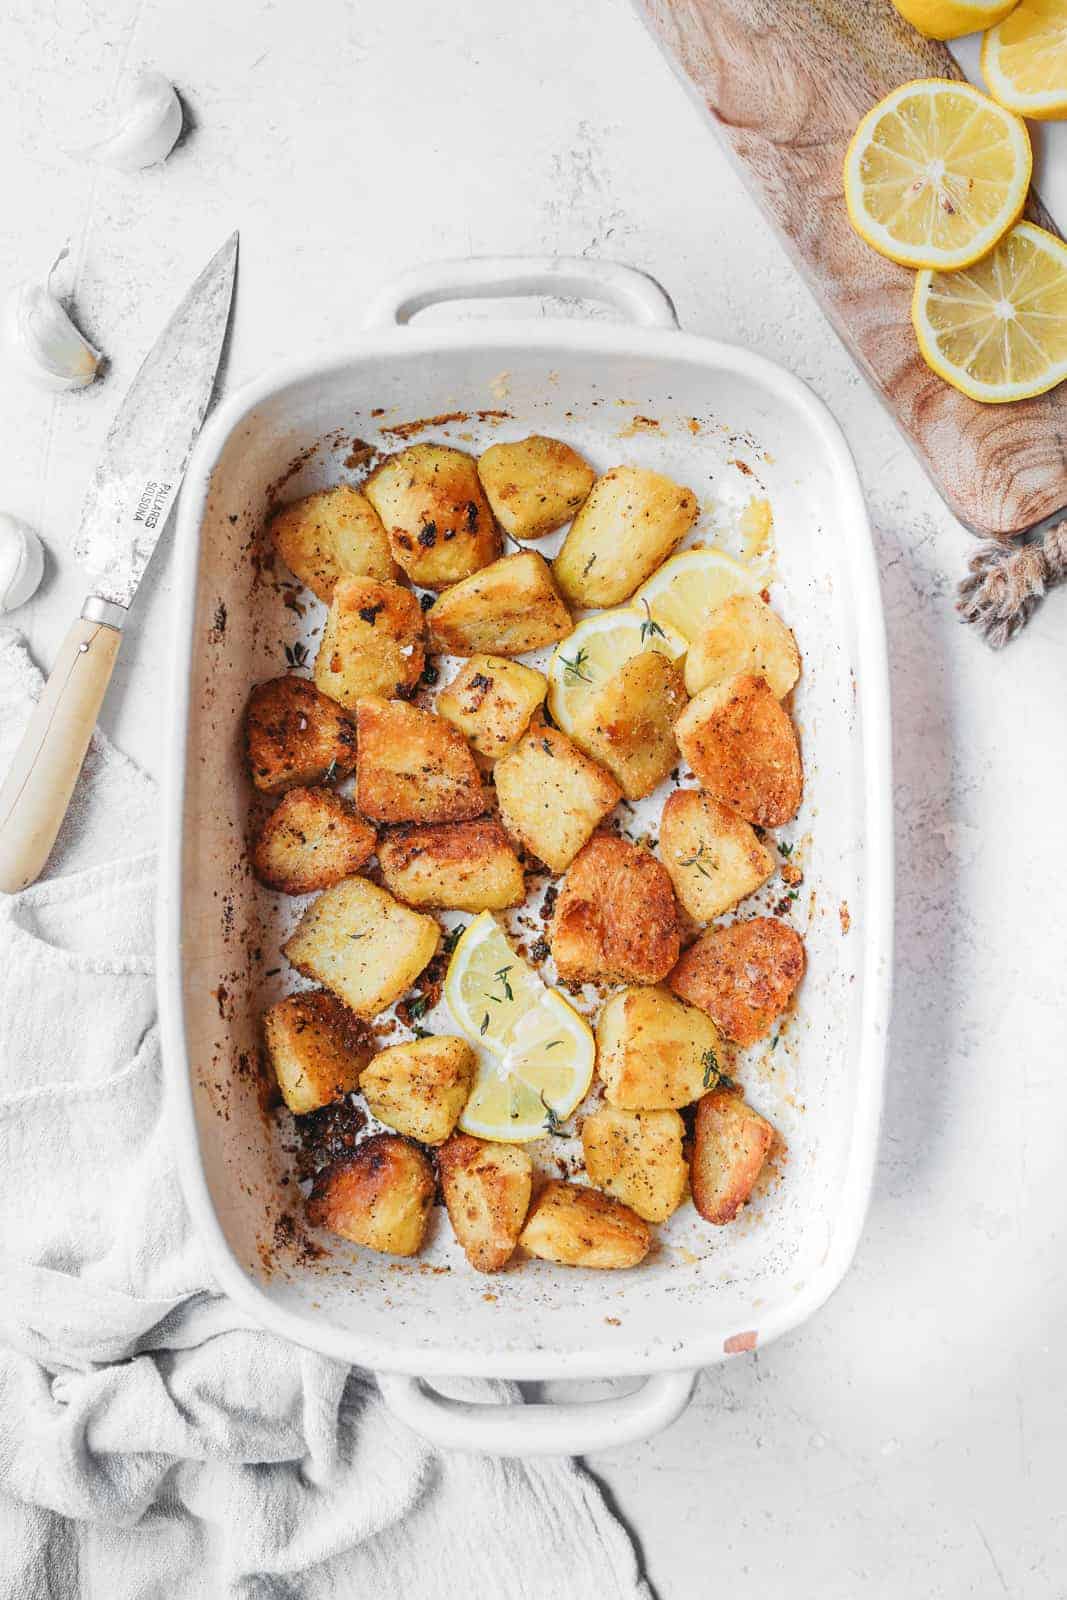 Baking dish with crispy roasted potatoes in it